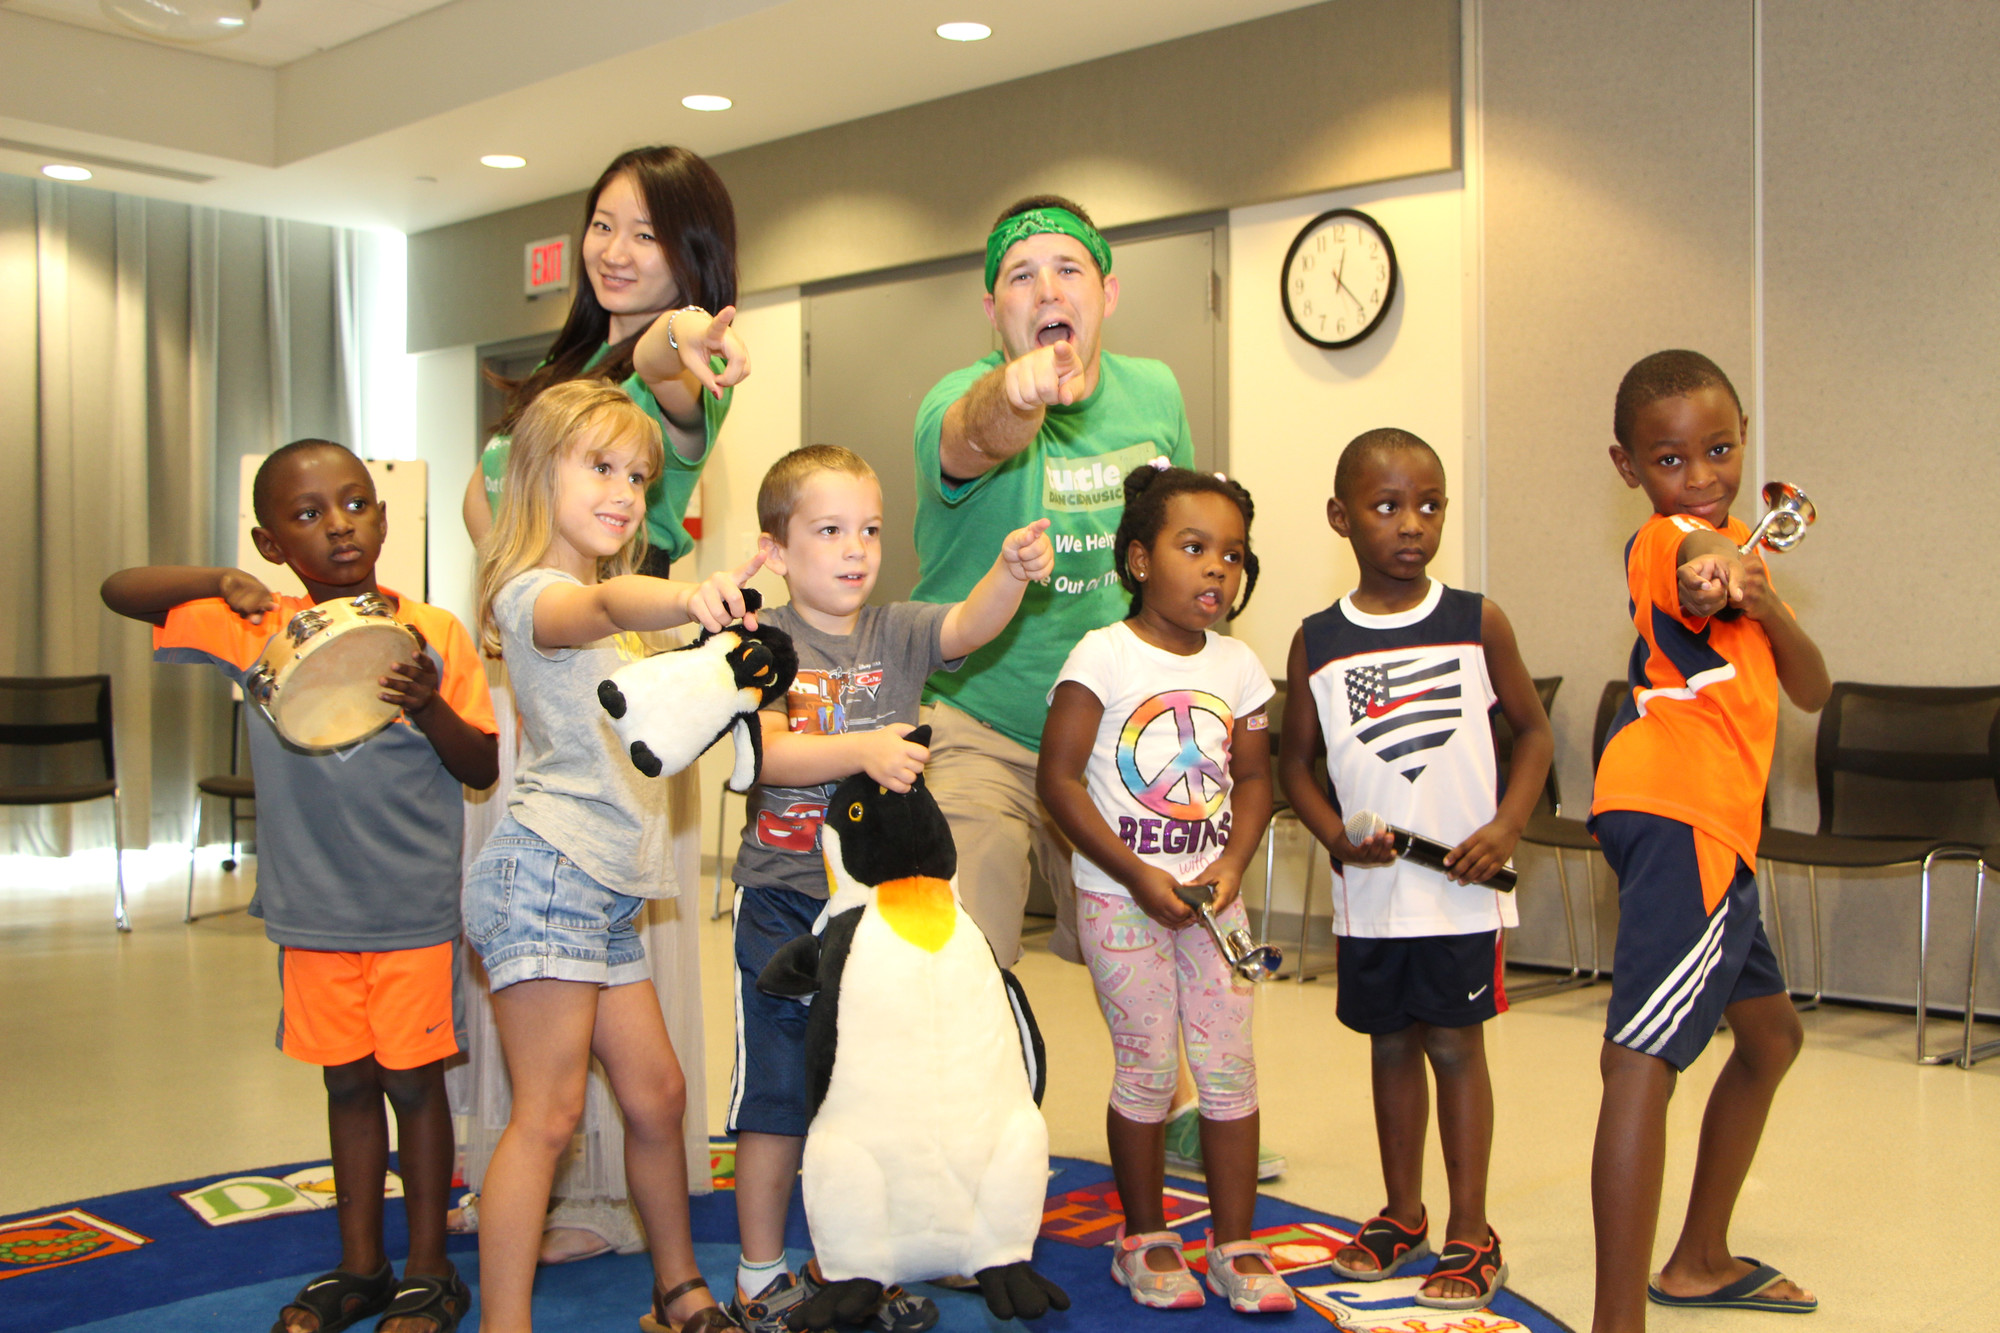 Shu Wang, back row left, and Matt Mazur, back row right, brought Turtle Dance Music to Baldwin Public Libary on Aug. 21 for Read-To-Me Club members to enjoy.